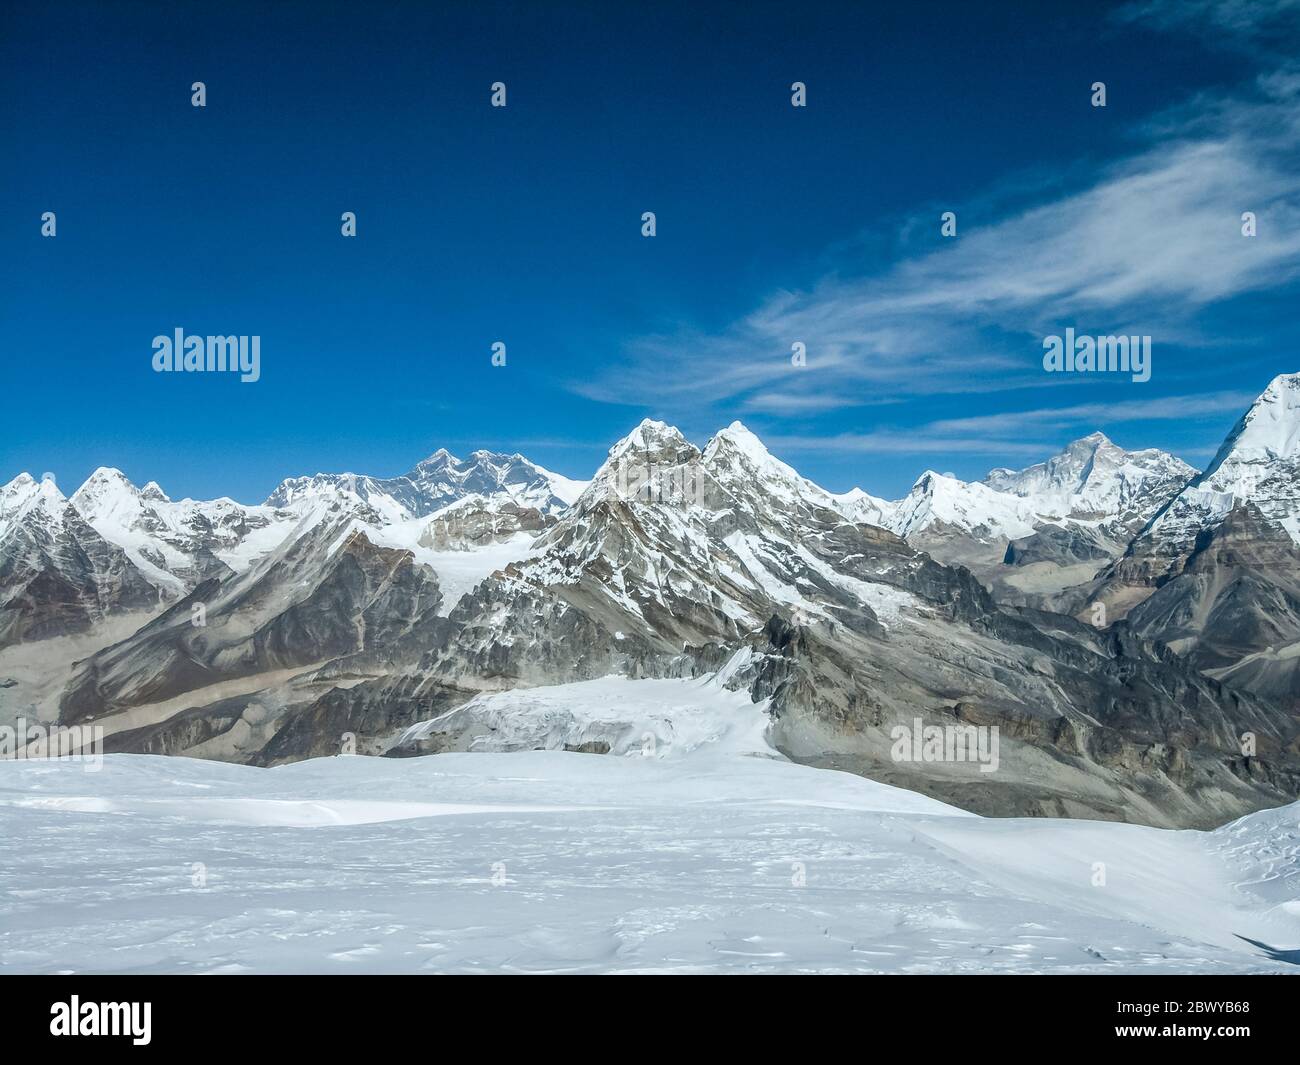 Nepal. Trek to Mera Peak. Sweeping panorama of Himalayan peaks from the   Mera Peak glacier, looking in the direction of Mount Everest 8848m the worlds highest mountain on the far centre horizon. The obvious snowy saddle In the foreground is the   Mera La pass and site of High Camp Stock Photo